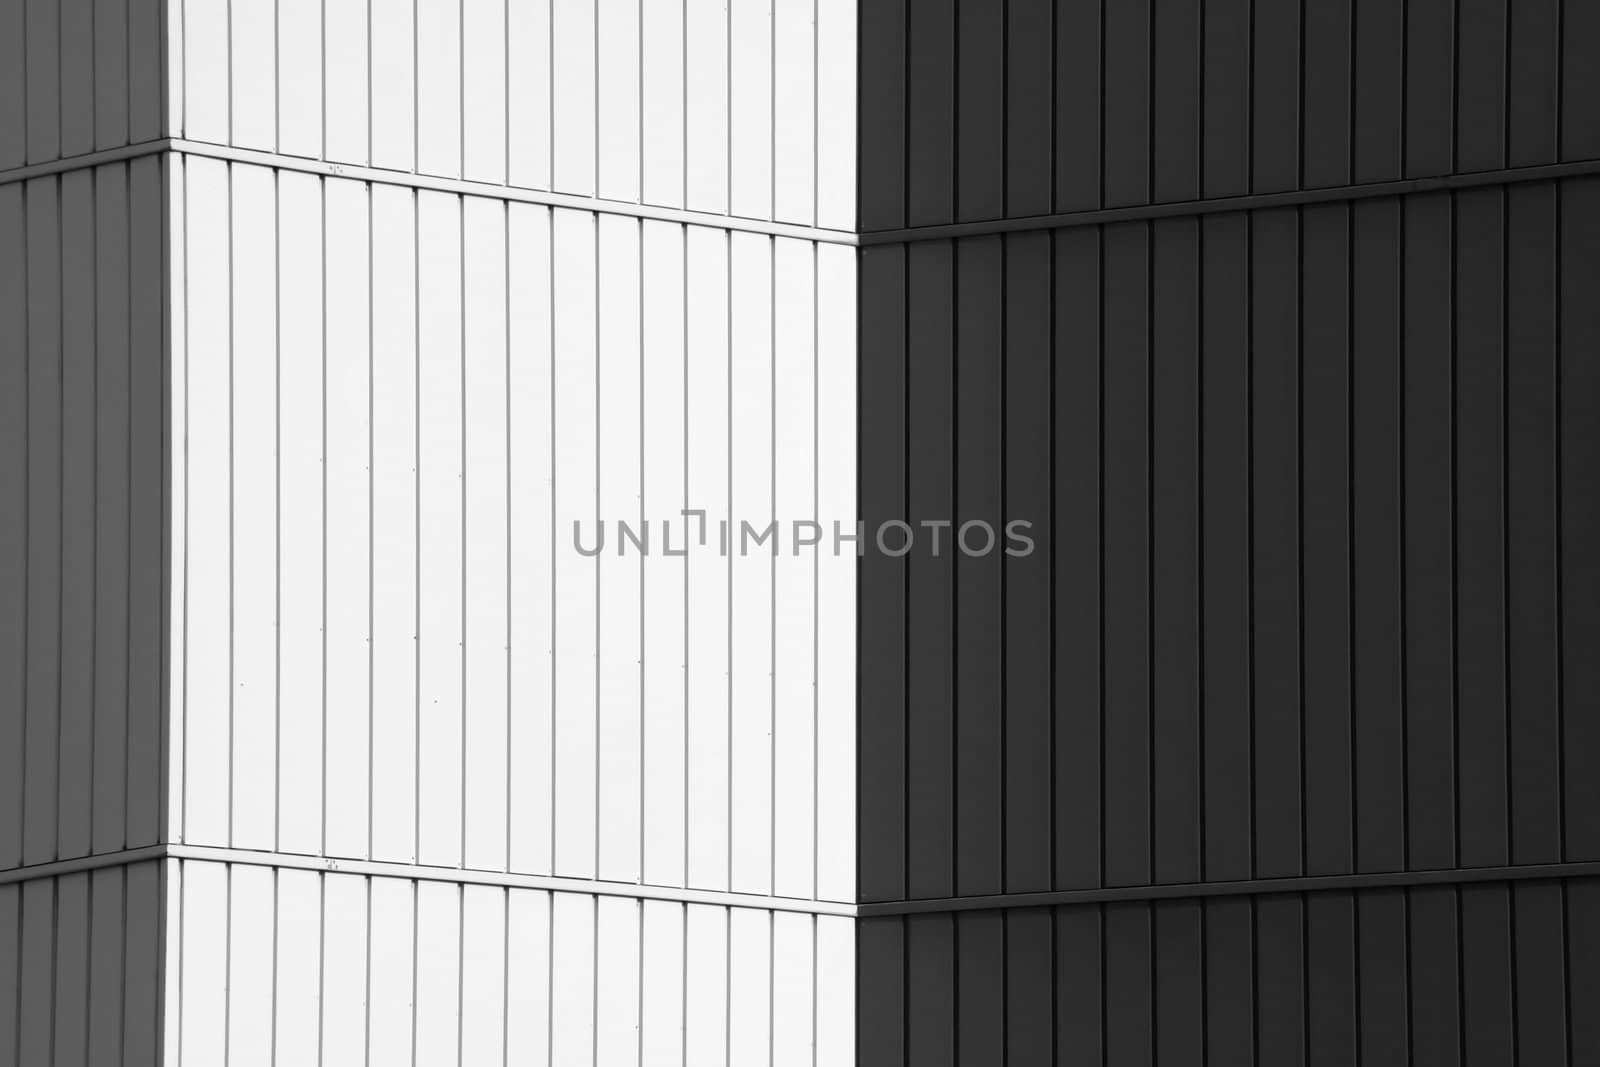 Cornered wall of an office building covered with white and black panels.